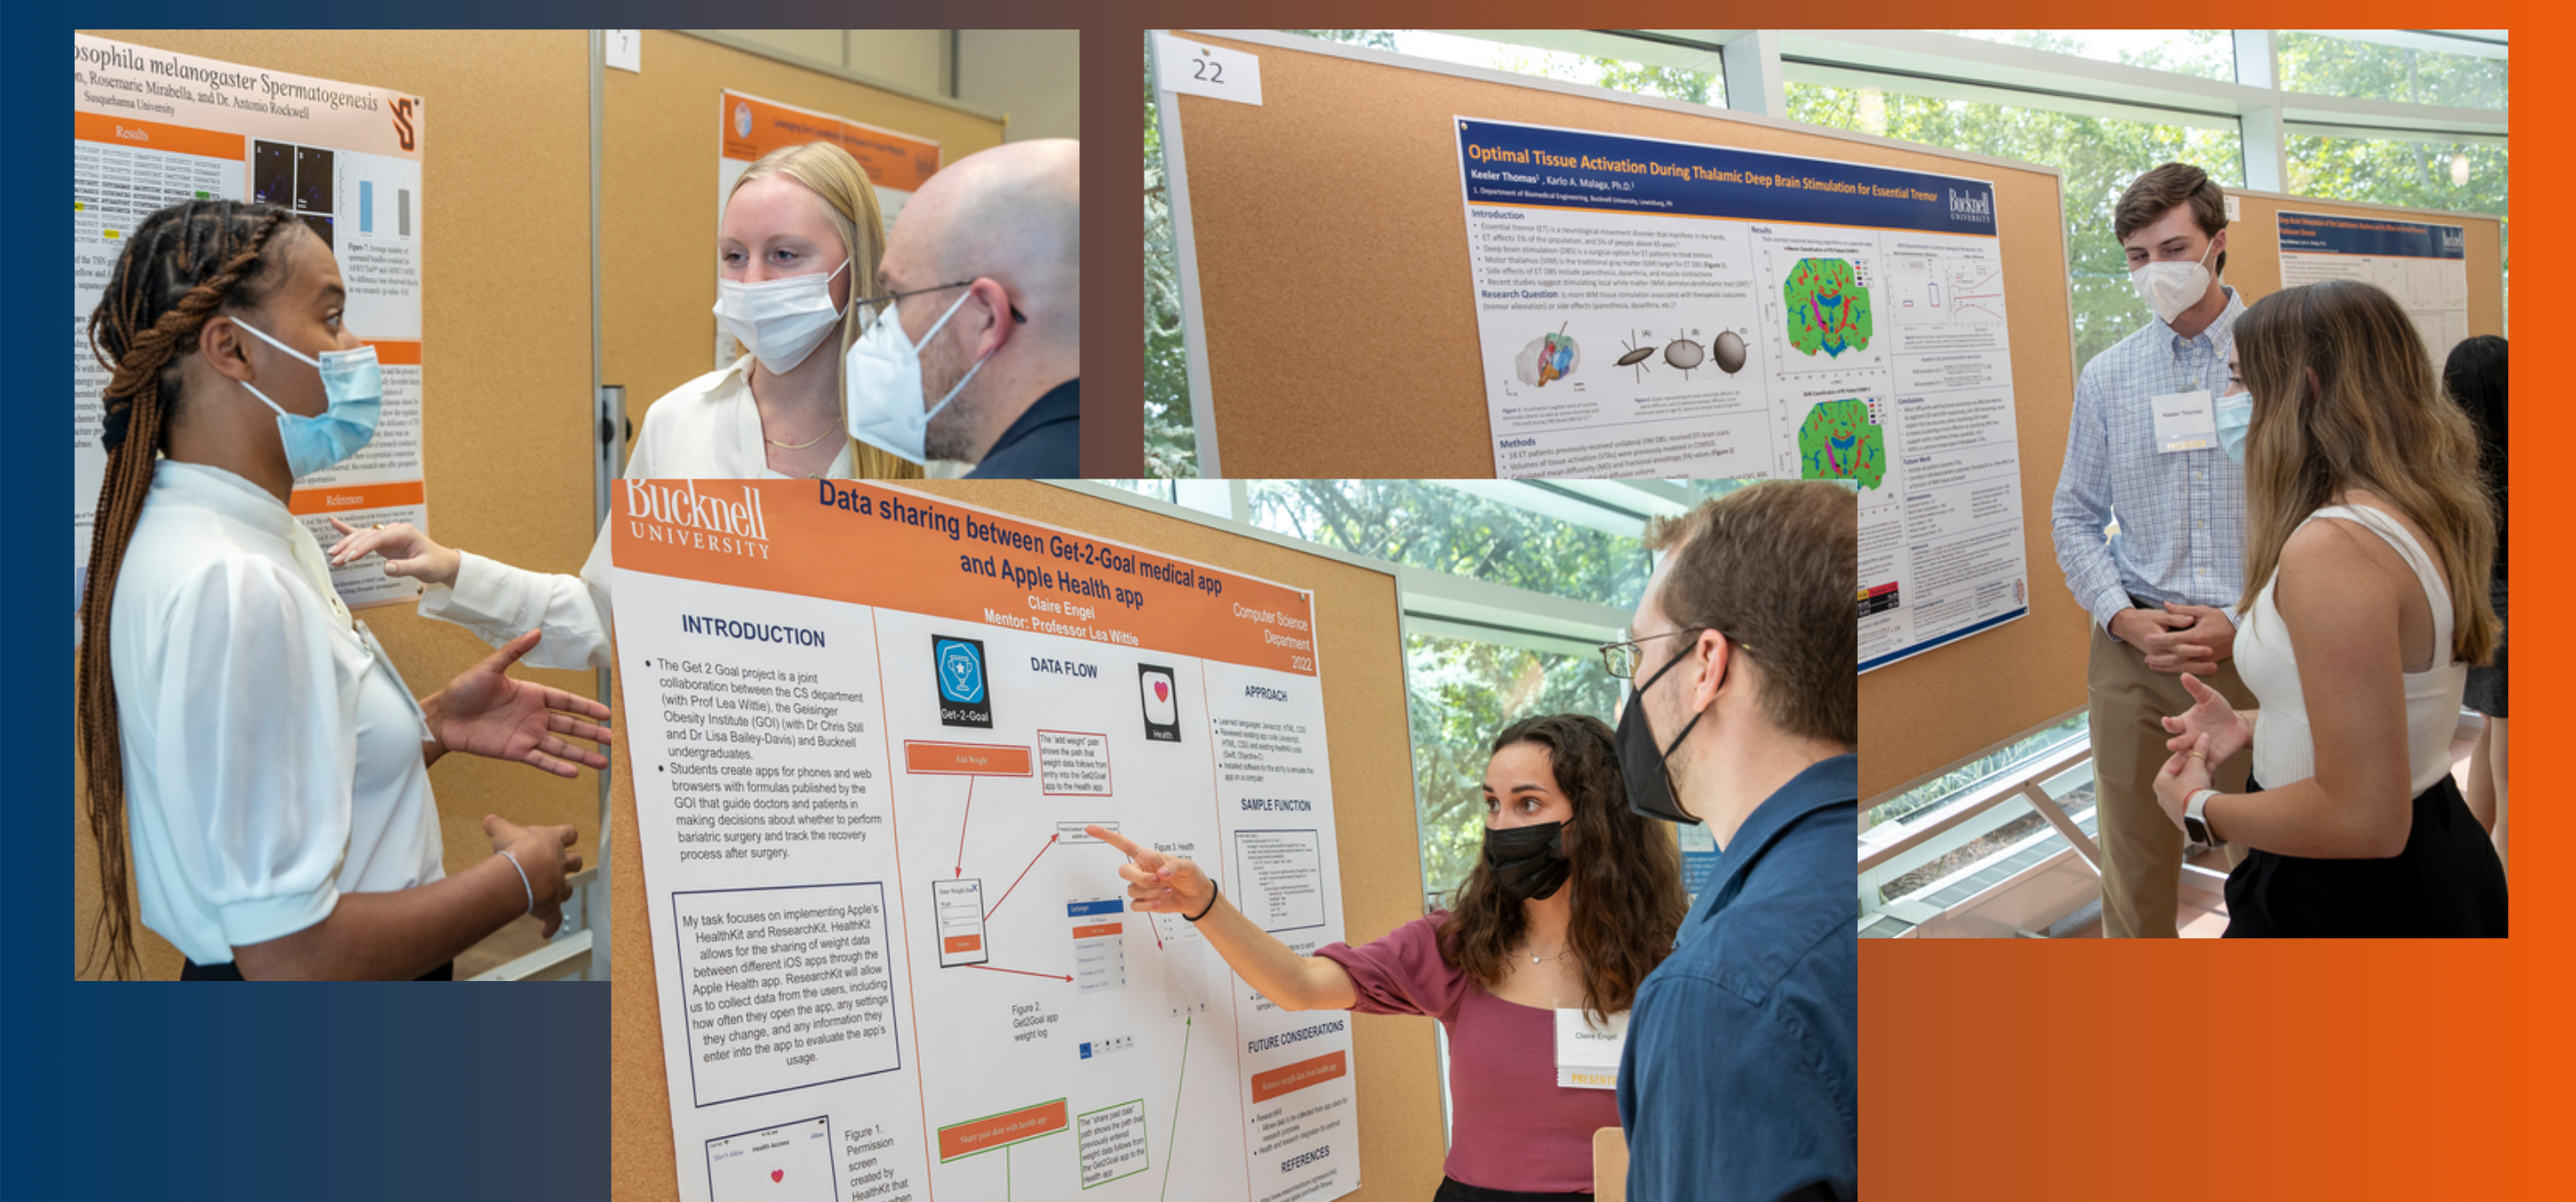 A collage of photos, all showing students explaining their academic research posters.